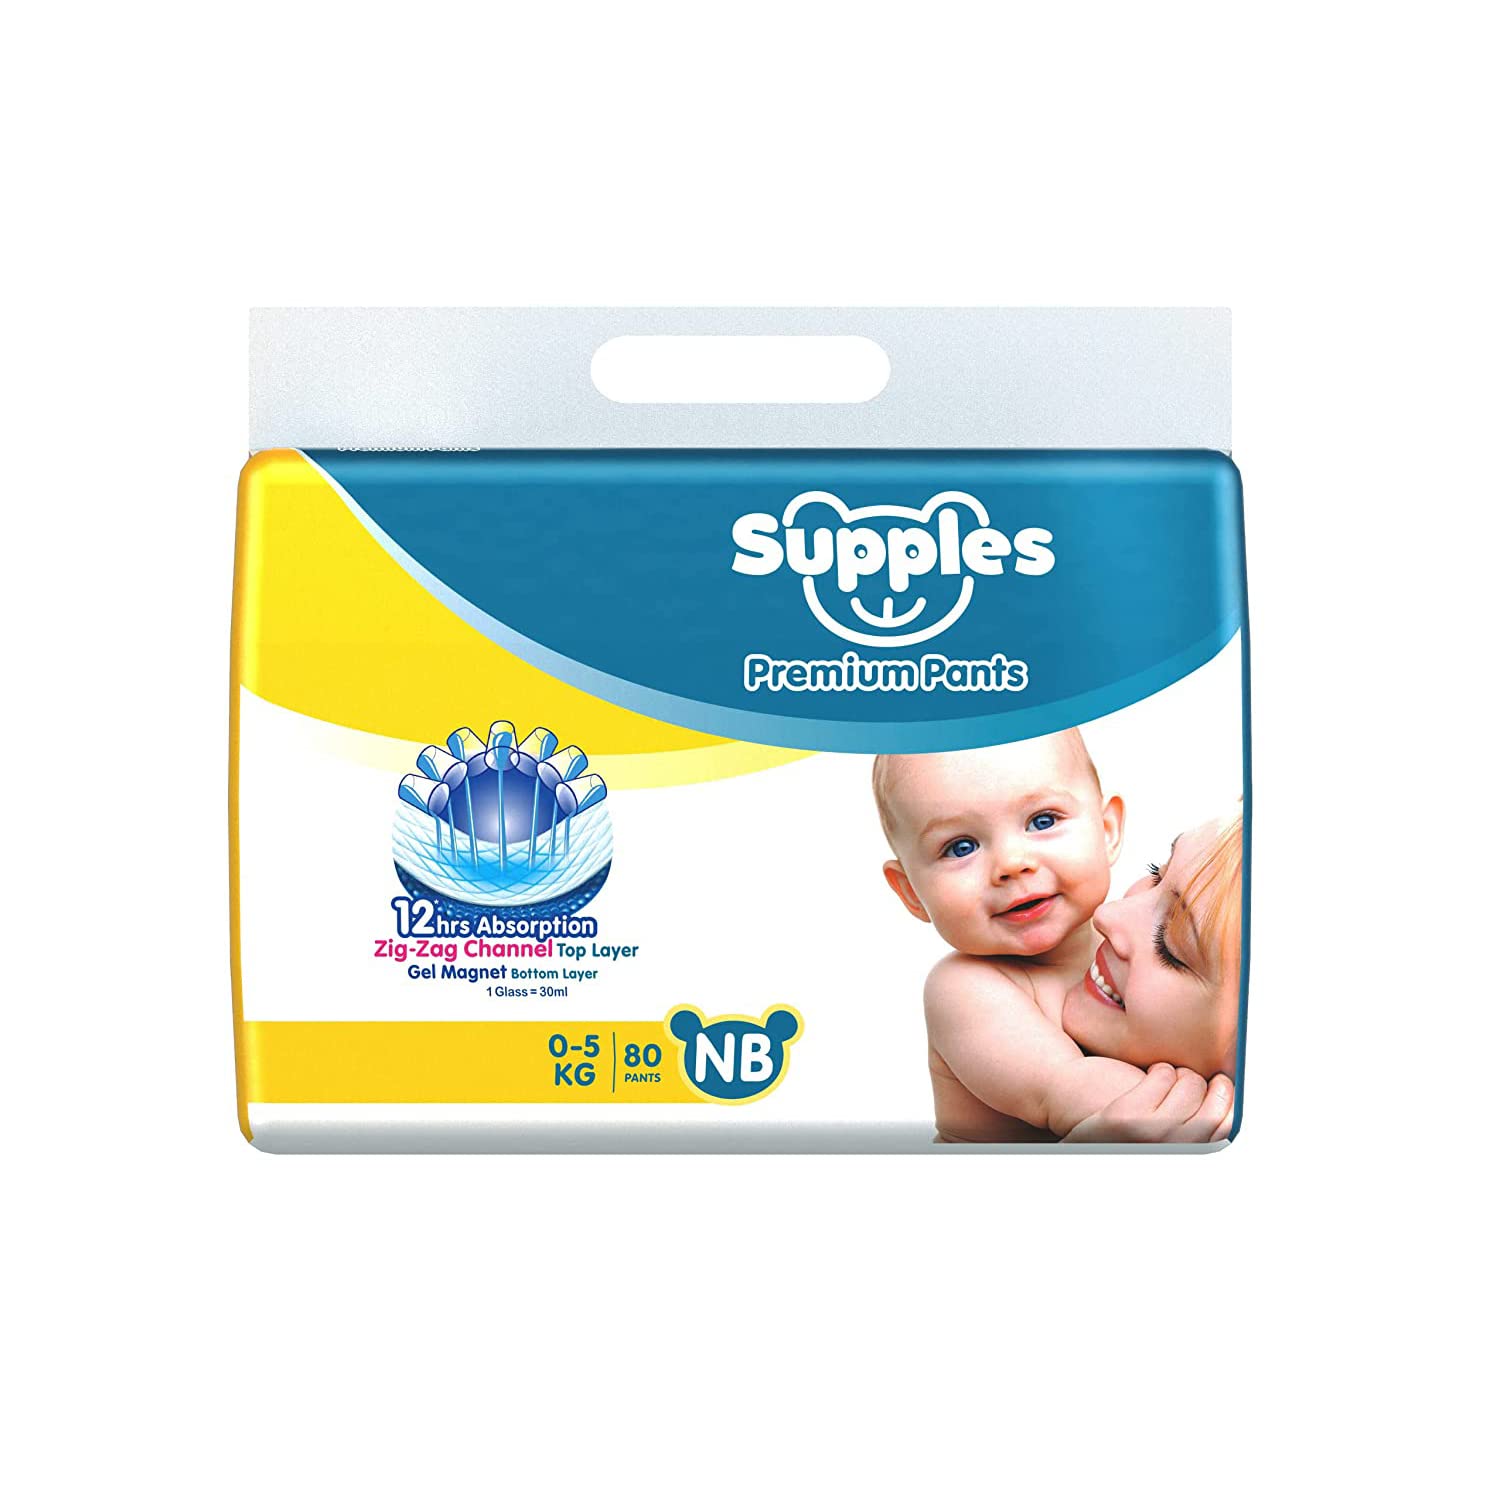 Supples Premium 12 Hrs Absorption Baby Diaper Pants